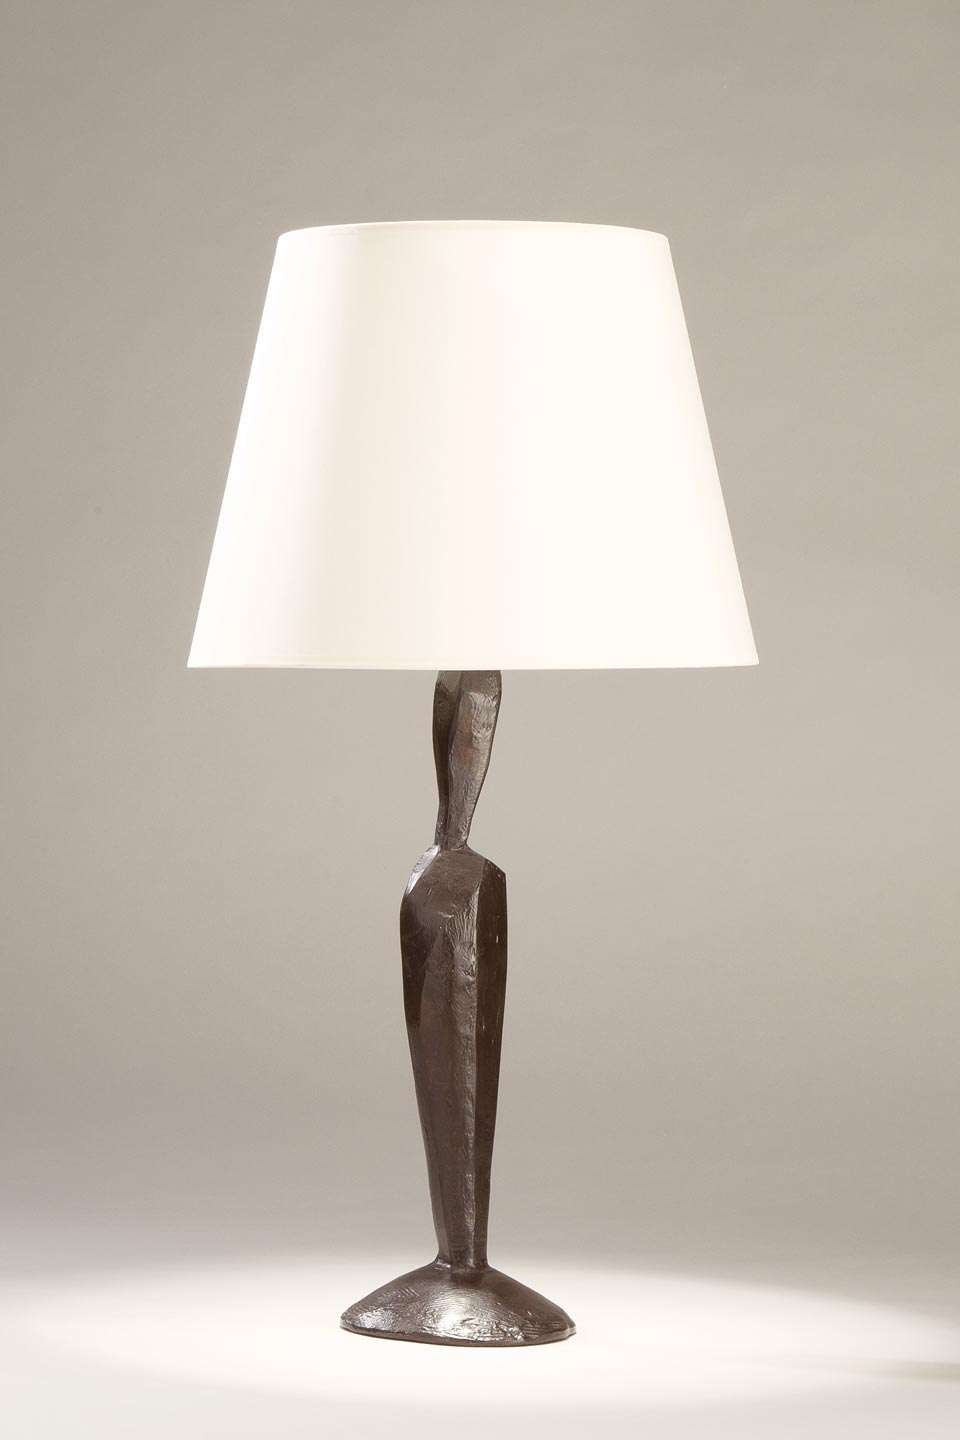 Jude black patinated bronze mineral table lamp. Objet insolite. 